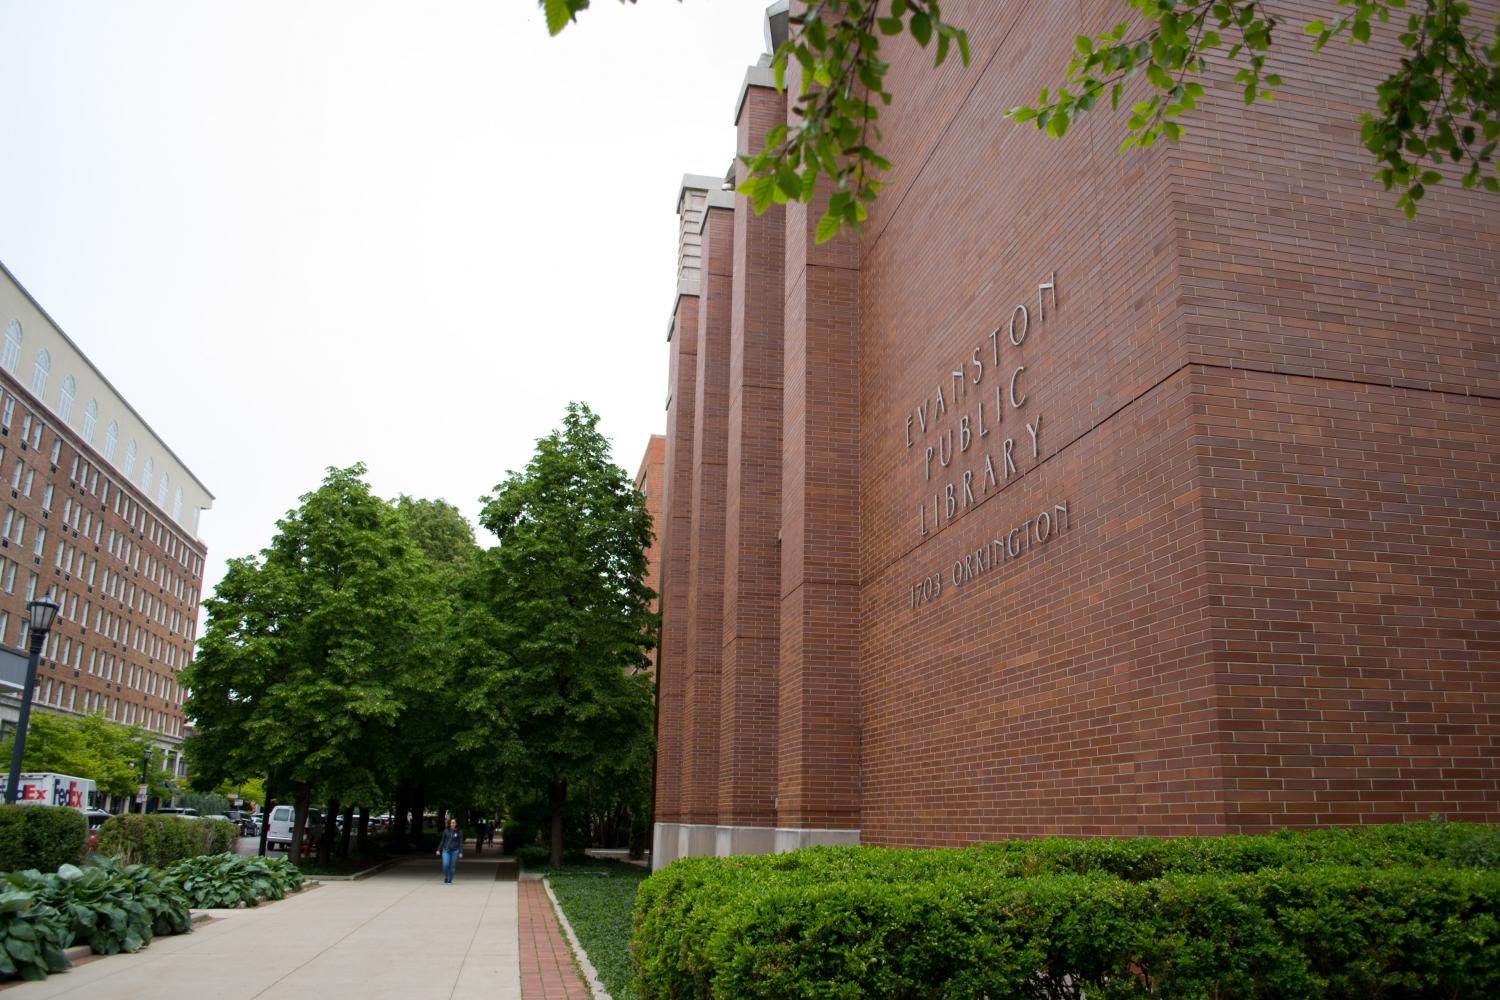 Evanston Public Library. The library, embroiled in controversy leading up to the eventual resignation of popular librarian Lesley Williams last month, announced new officers for its Board of Trustees on Thursday.